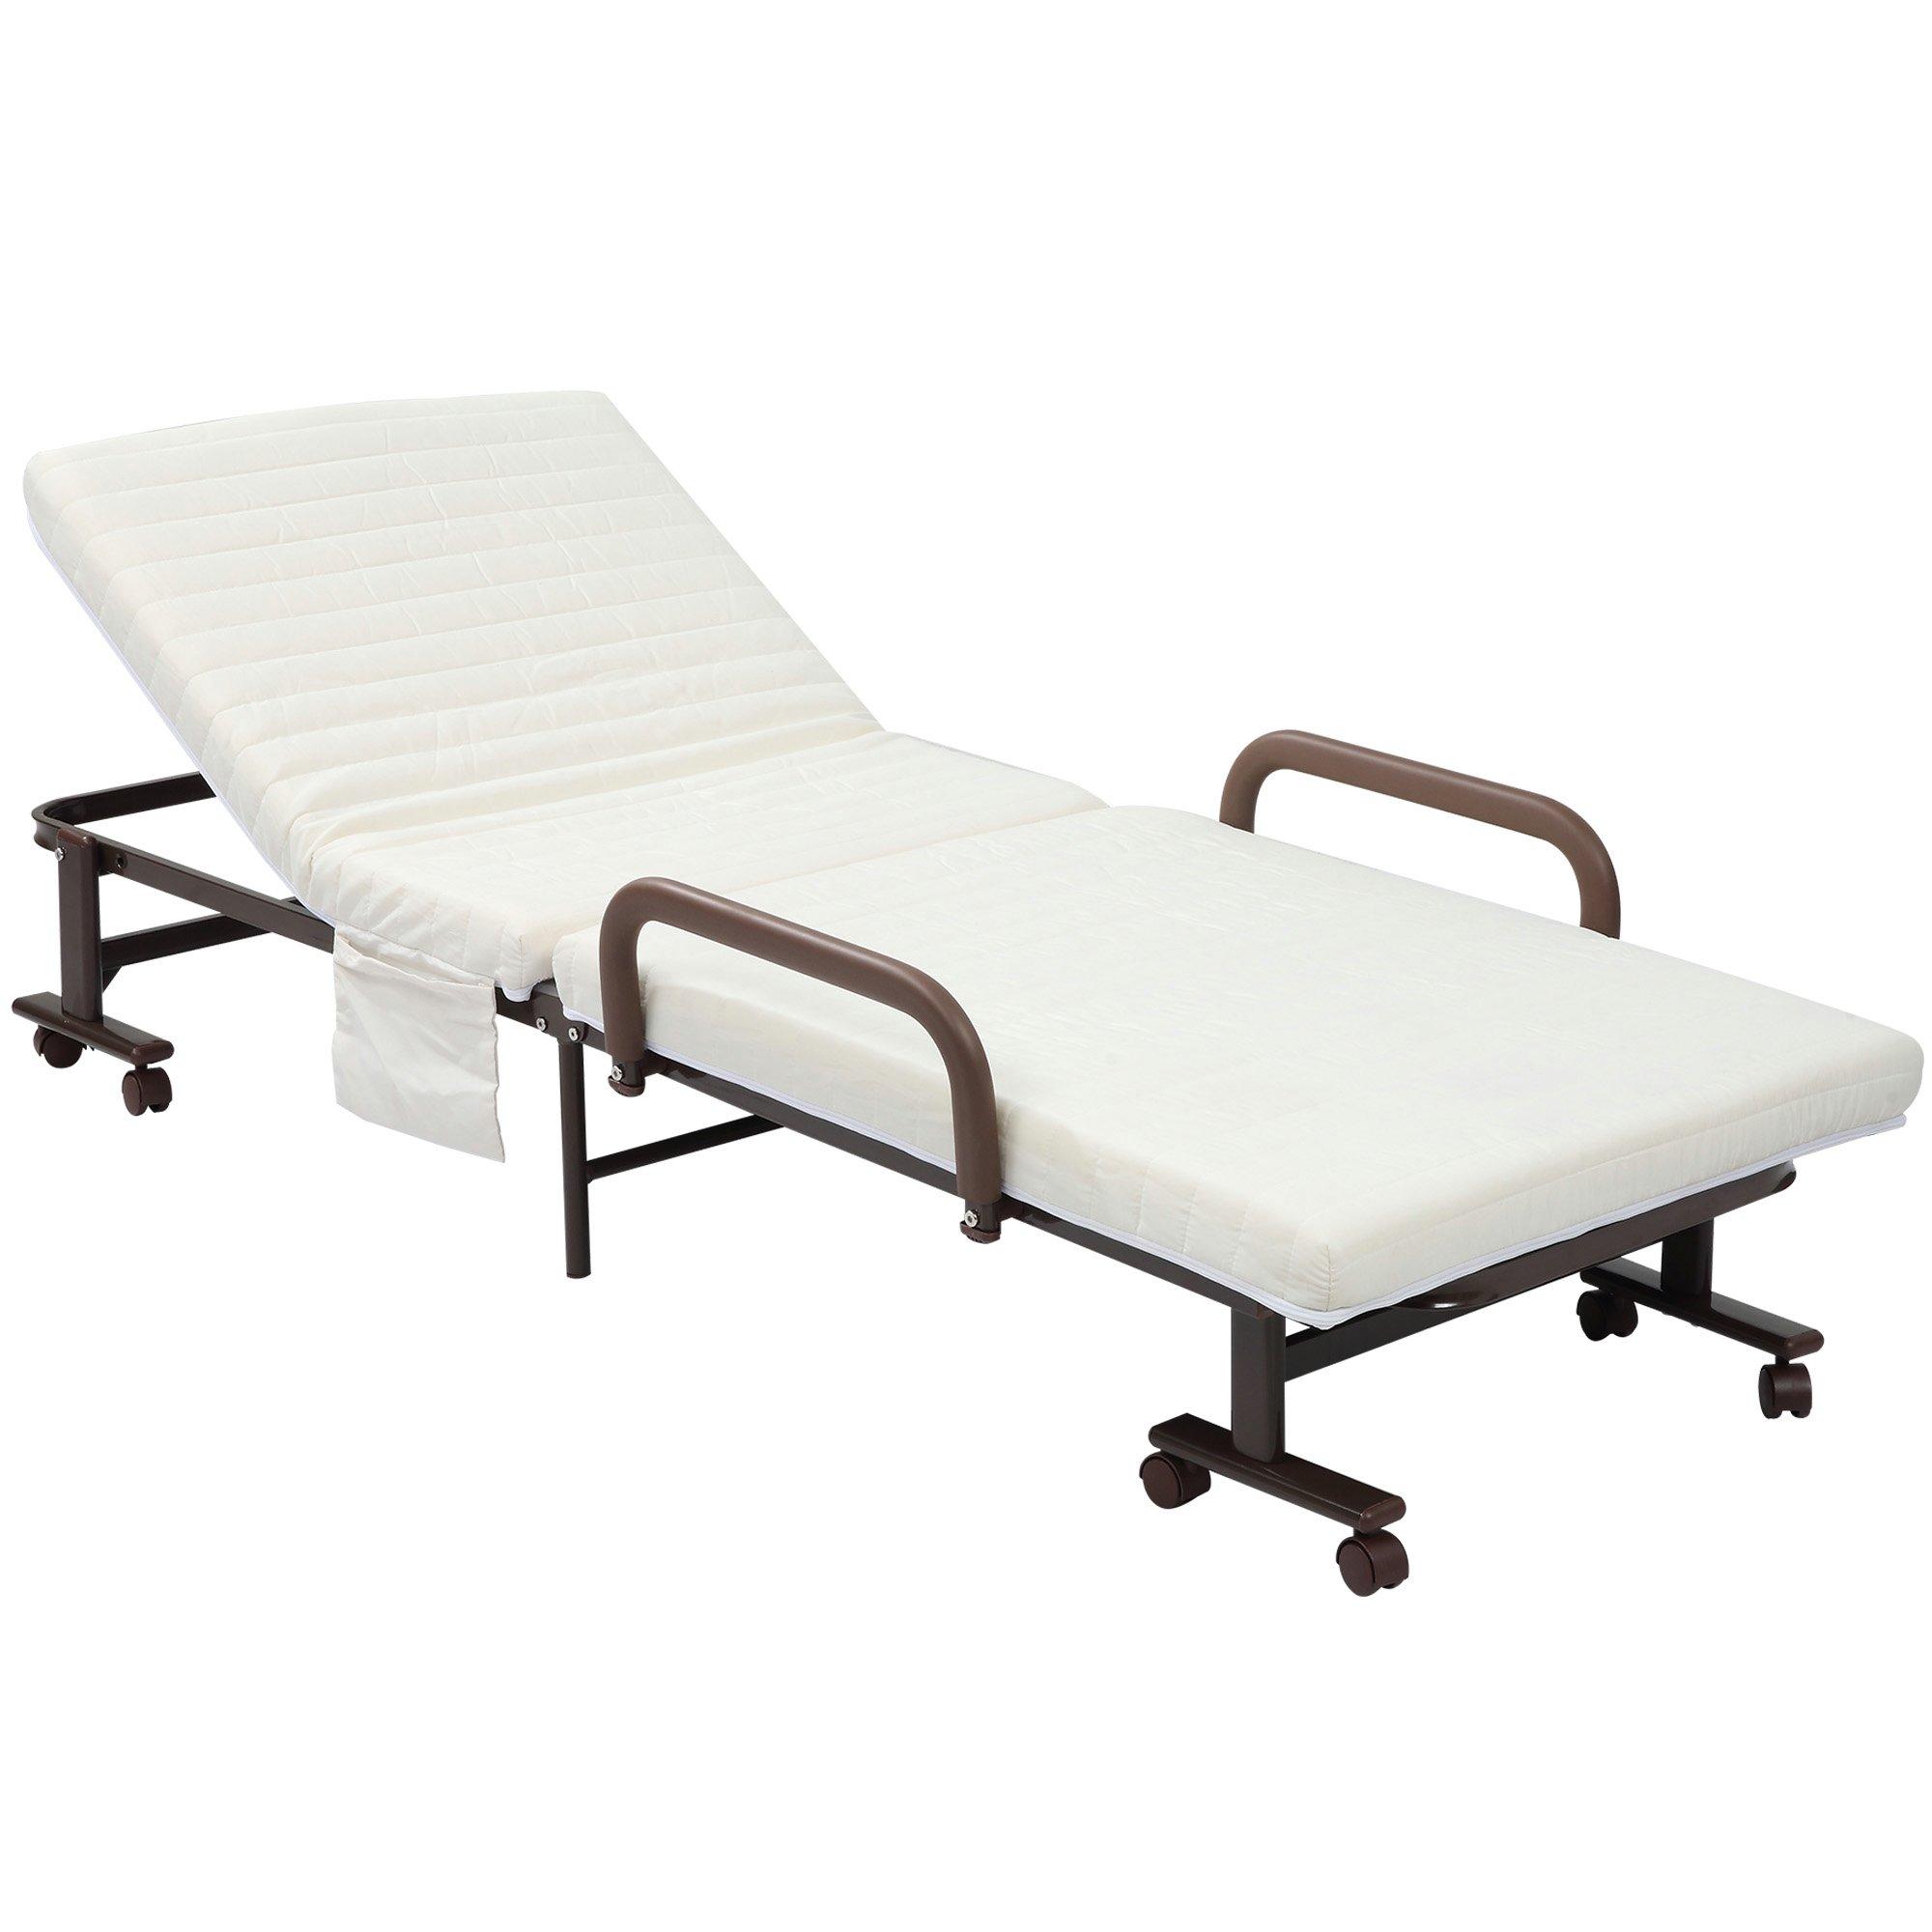 Folding Bed with Mattress Guest Bed with Adjustable Backrest & Wheels